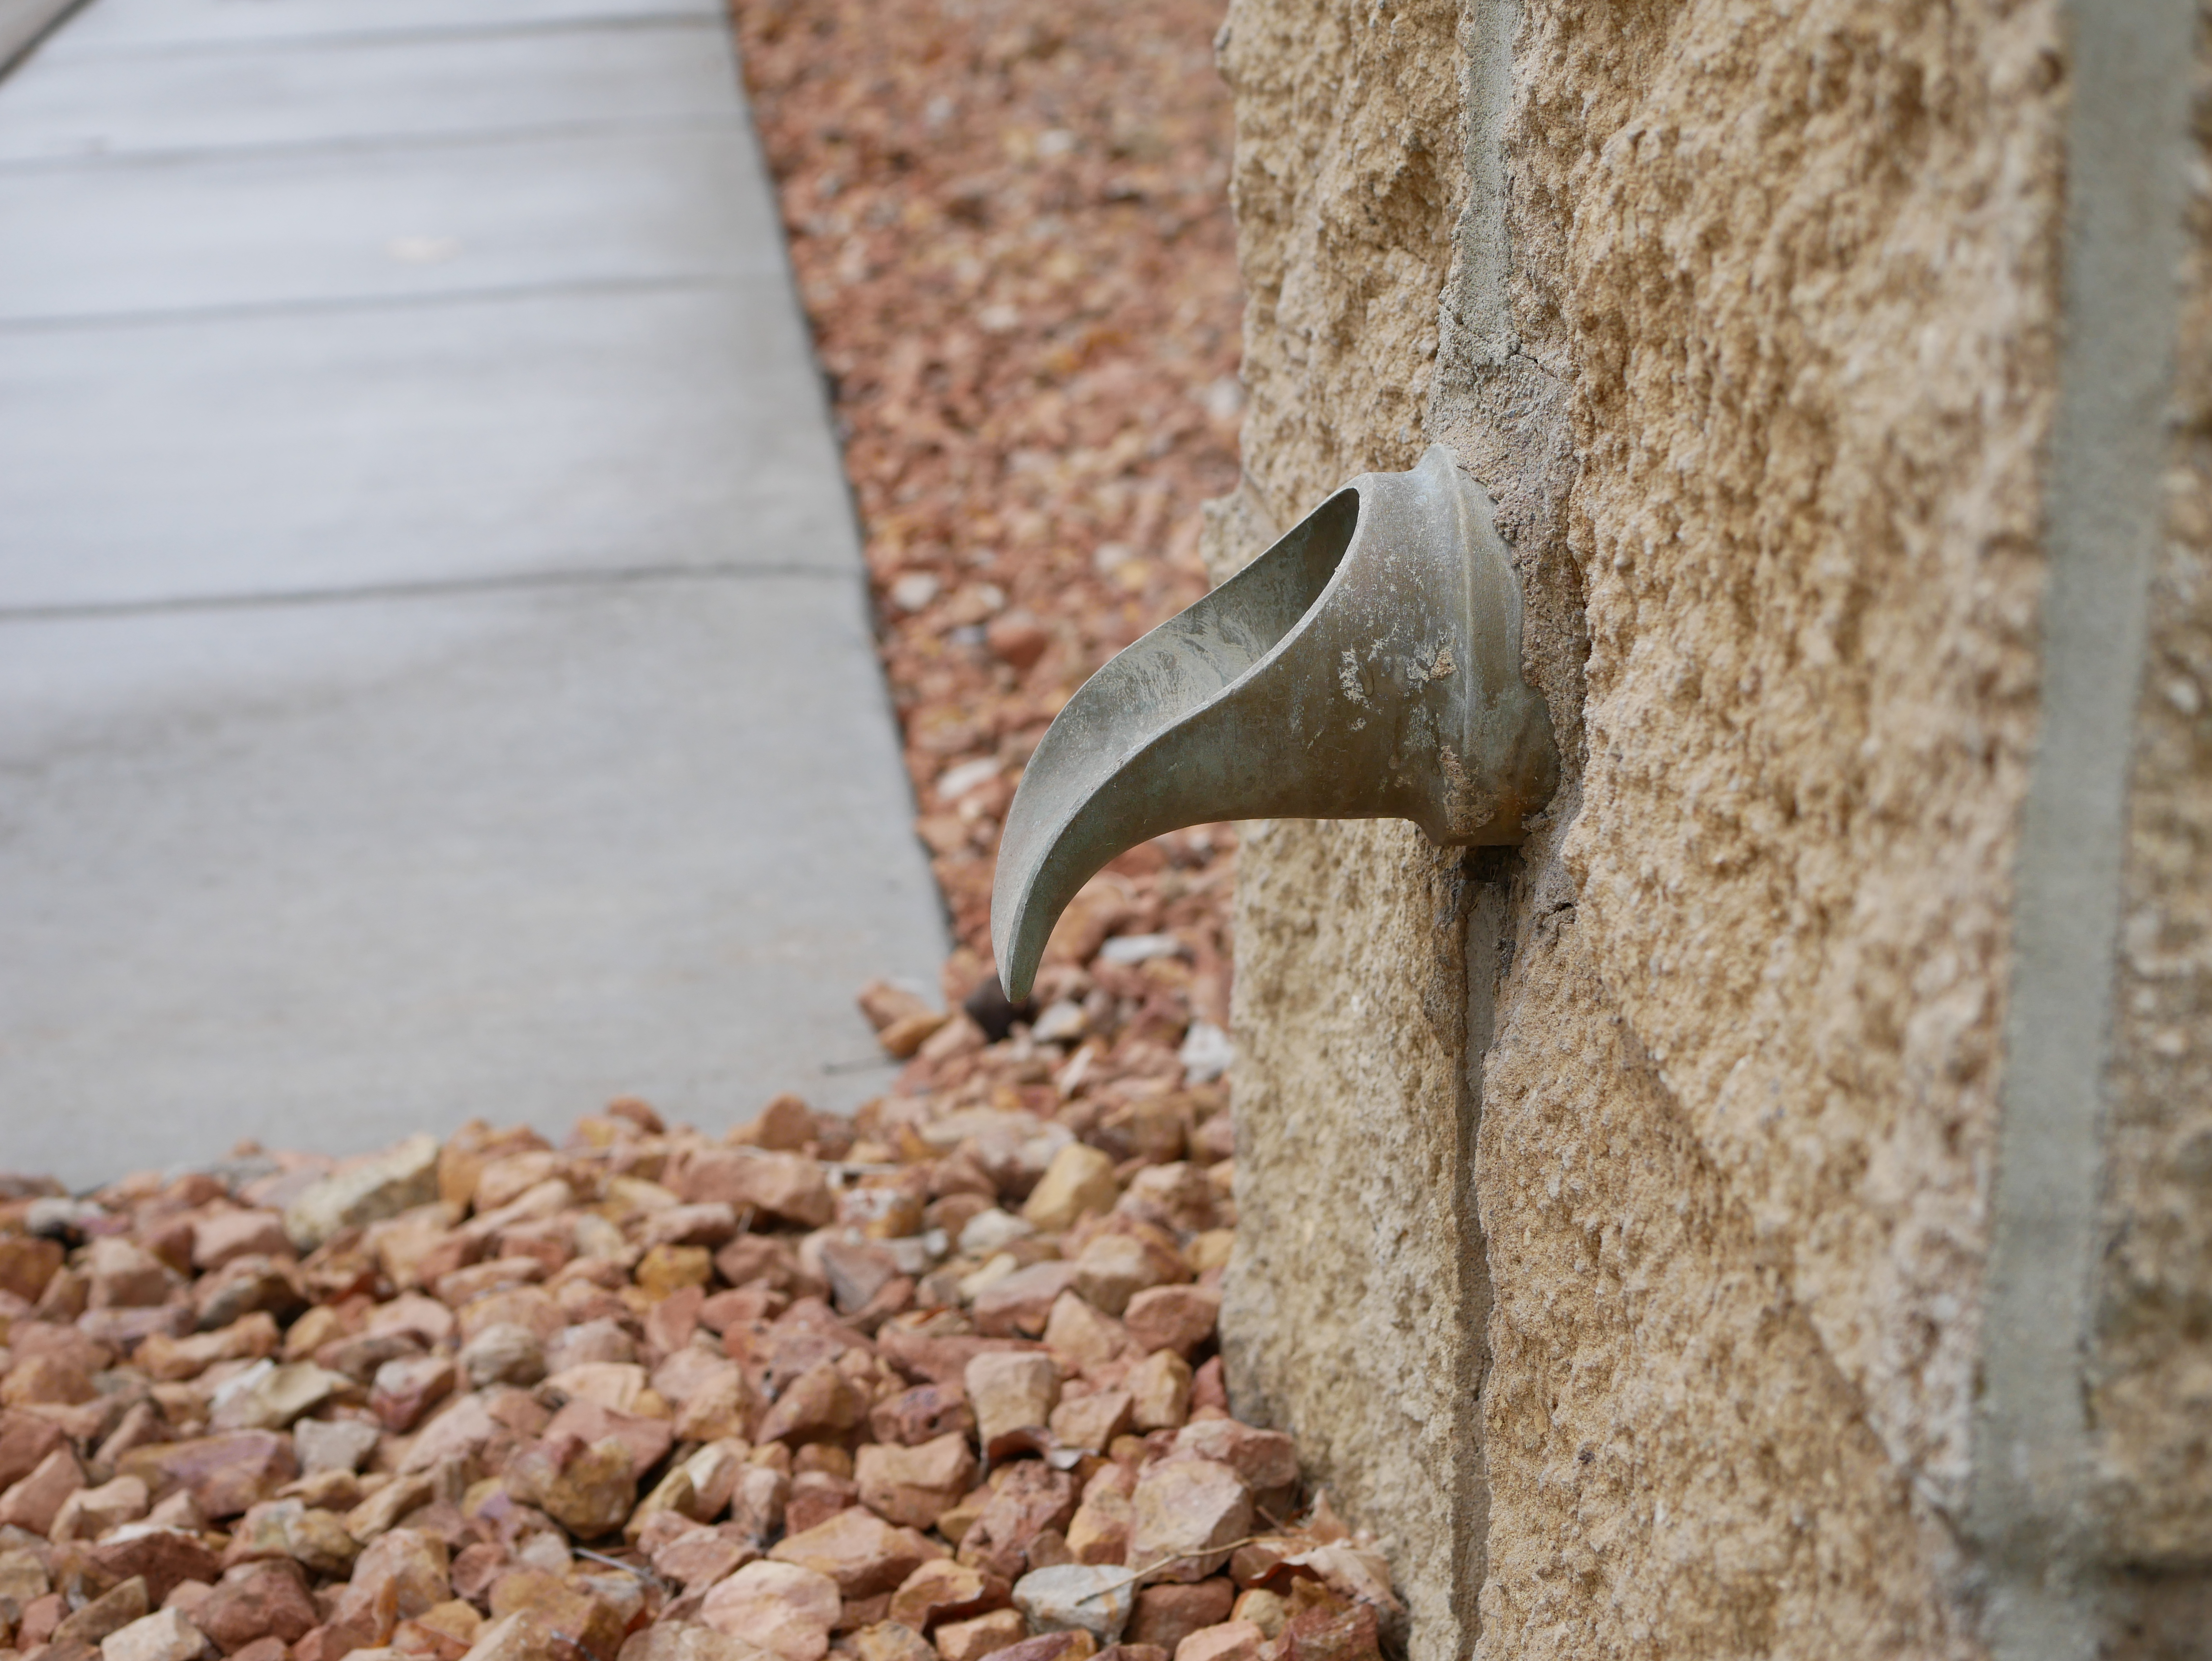 District office_2019Apr22_Downspout or scupper spilling to hard surface profile shot.JPG